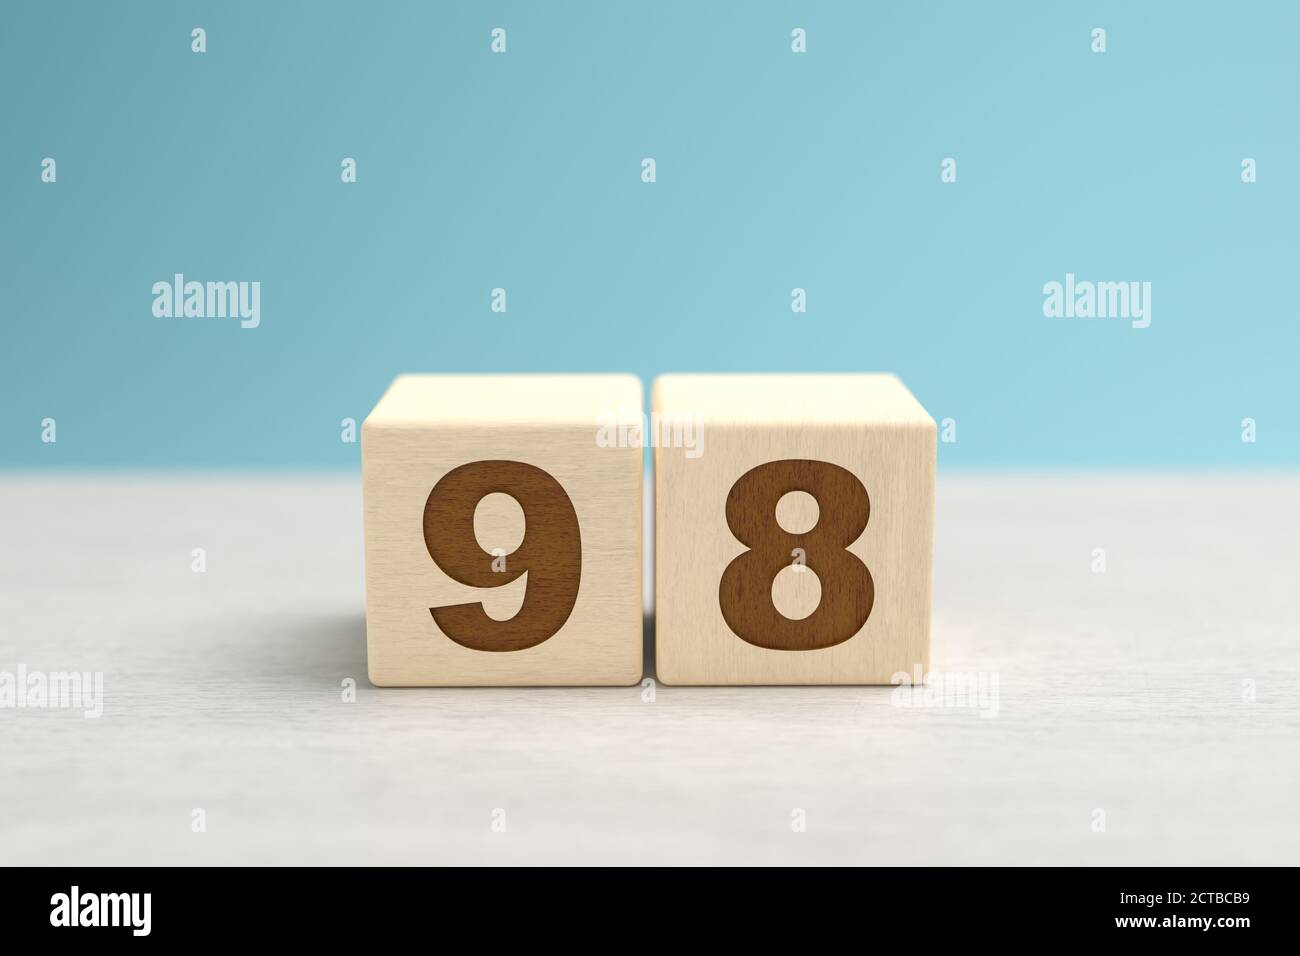 wooden-toy-blocks-forming-the-number-98-stock-photo-alamy